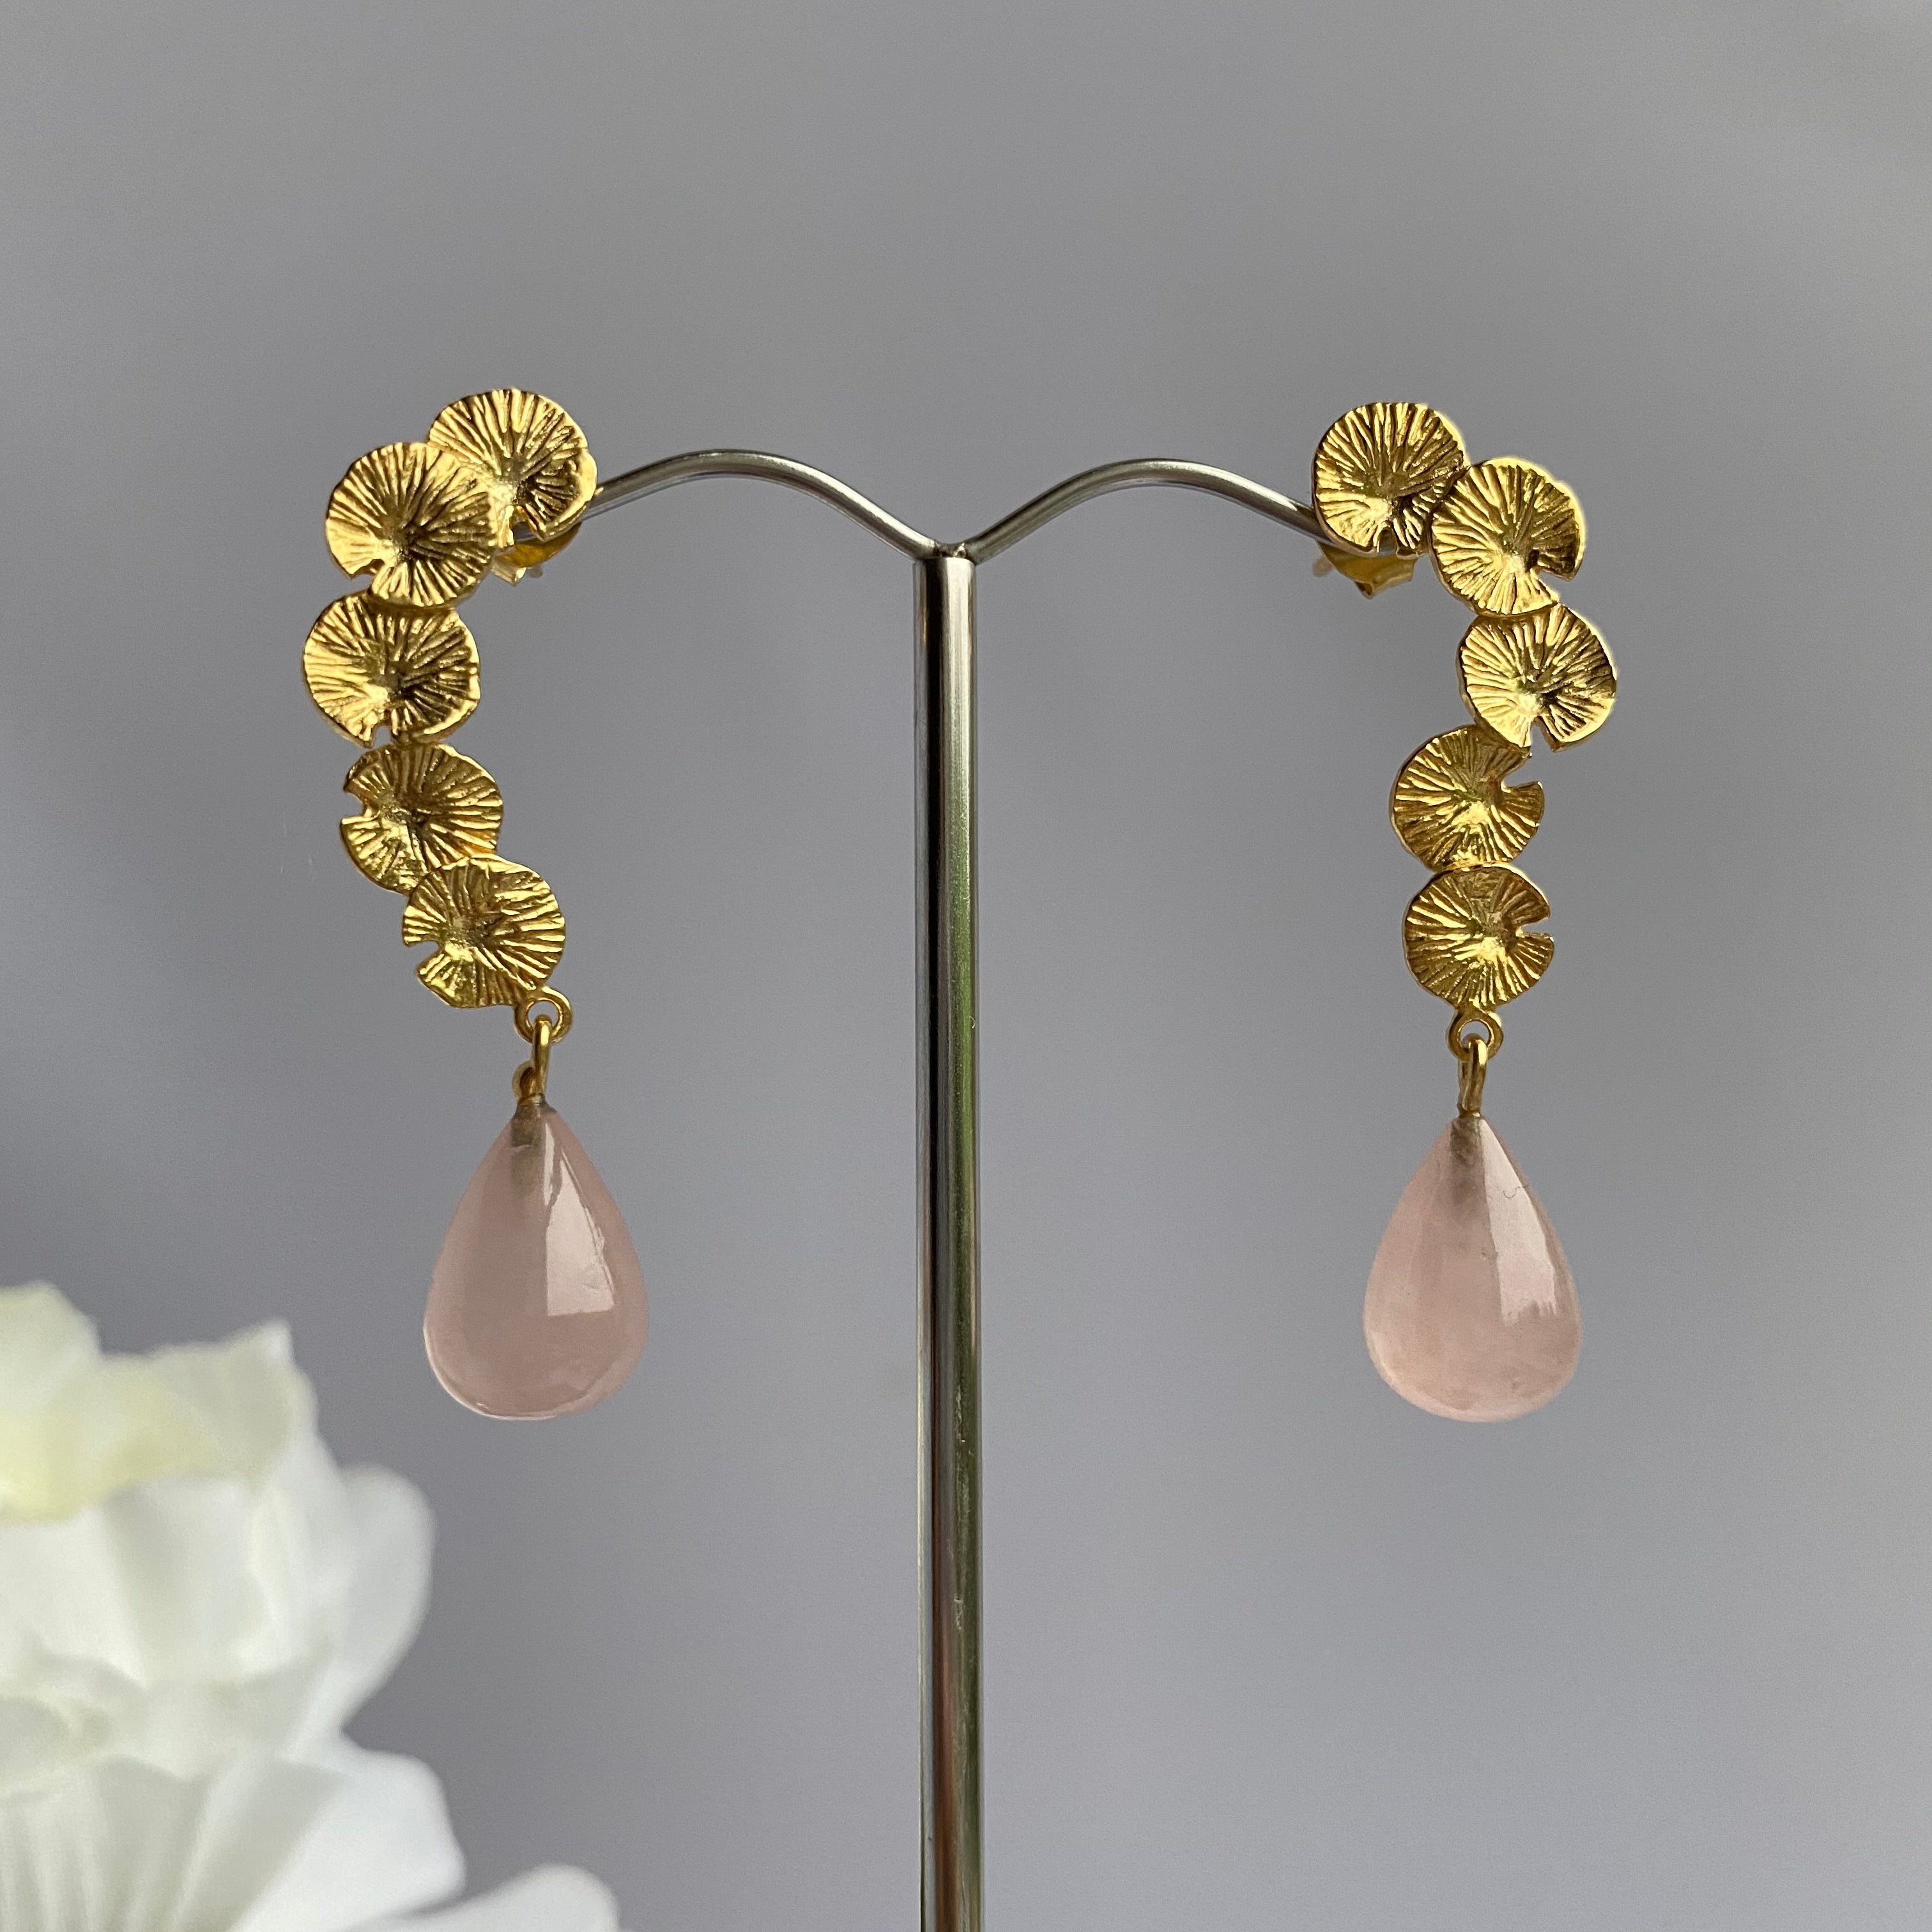 Lily Pad Earrings in Gold Plated Sterling Silver with a Rose Quartz Stone Drop